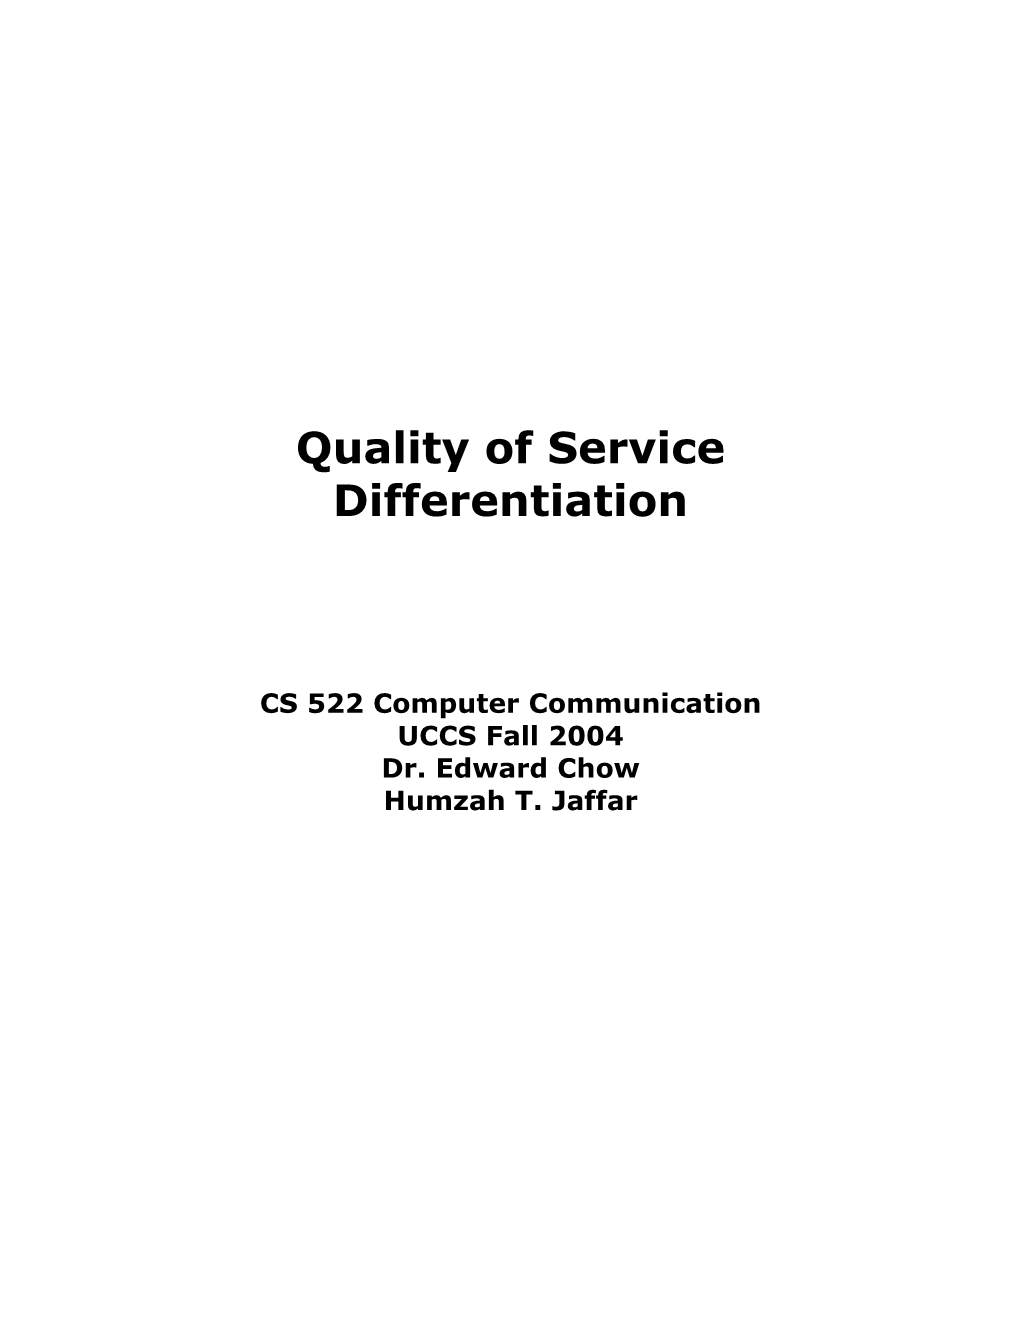 Quality of Service Differentiation